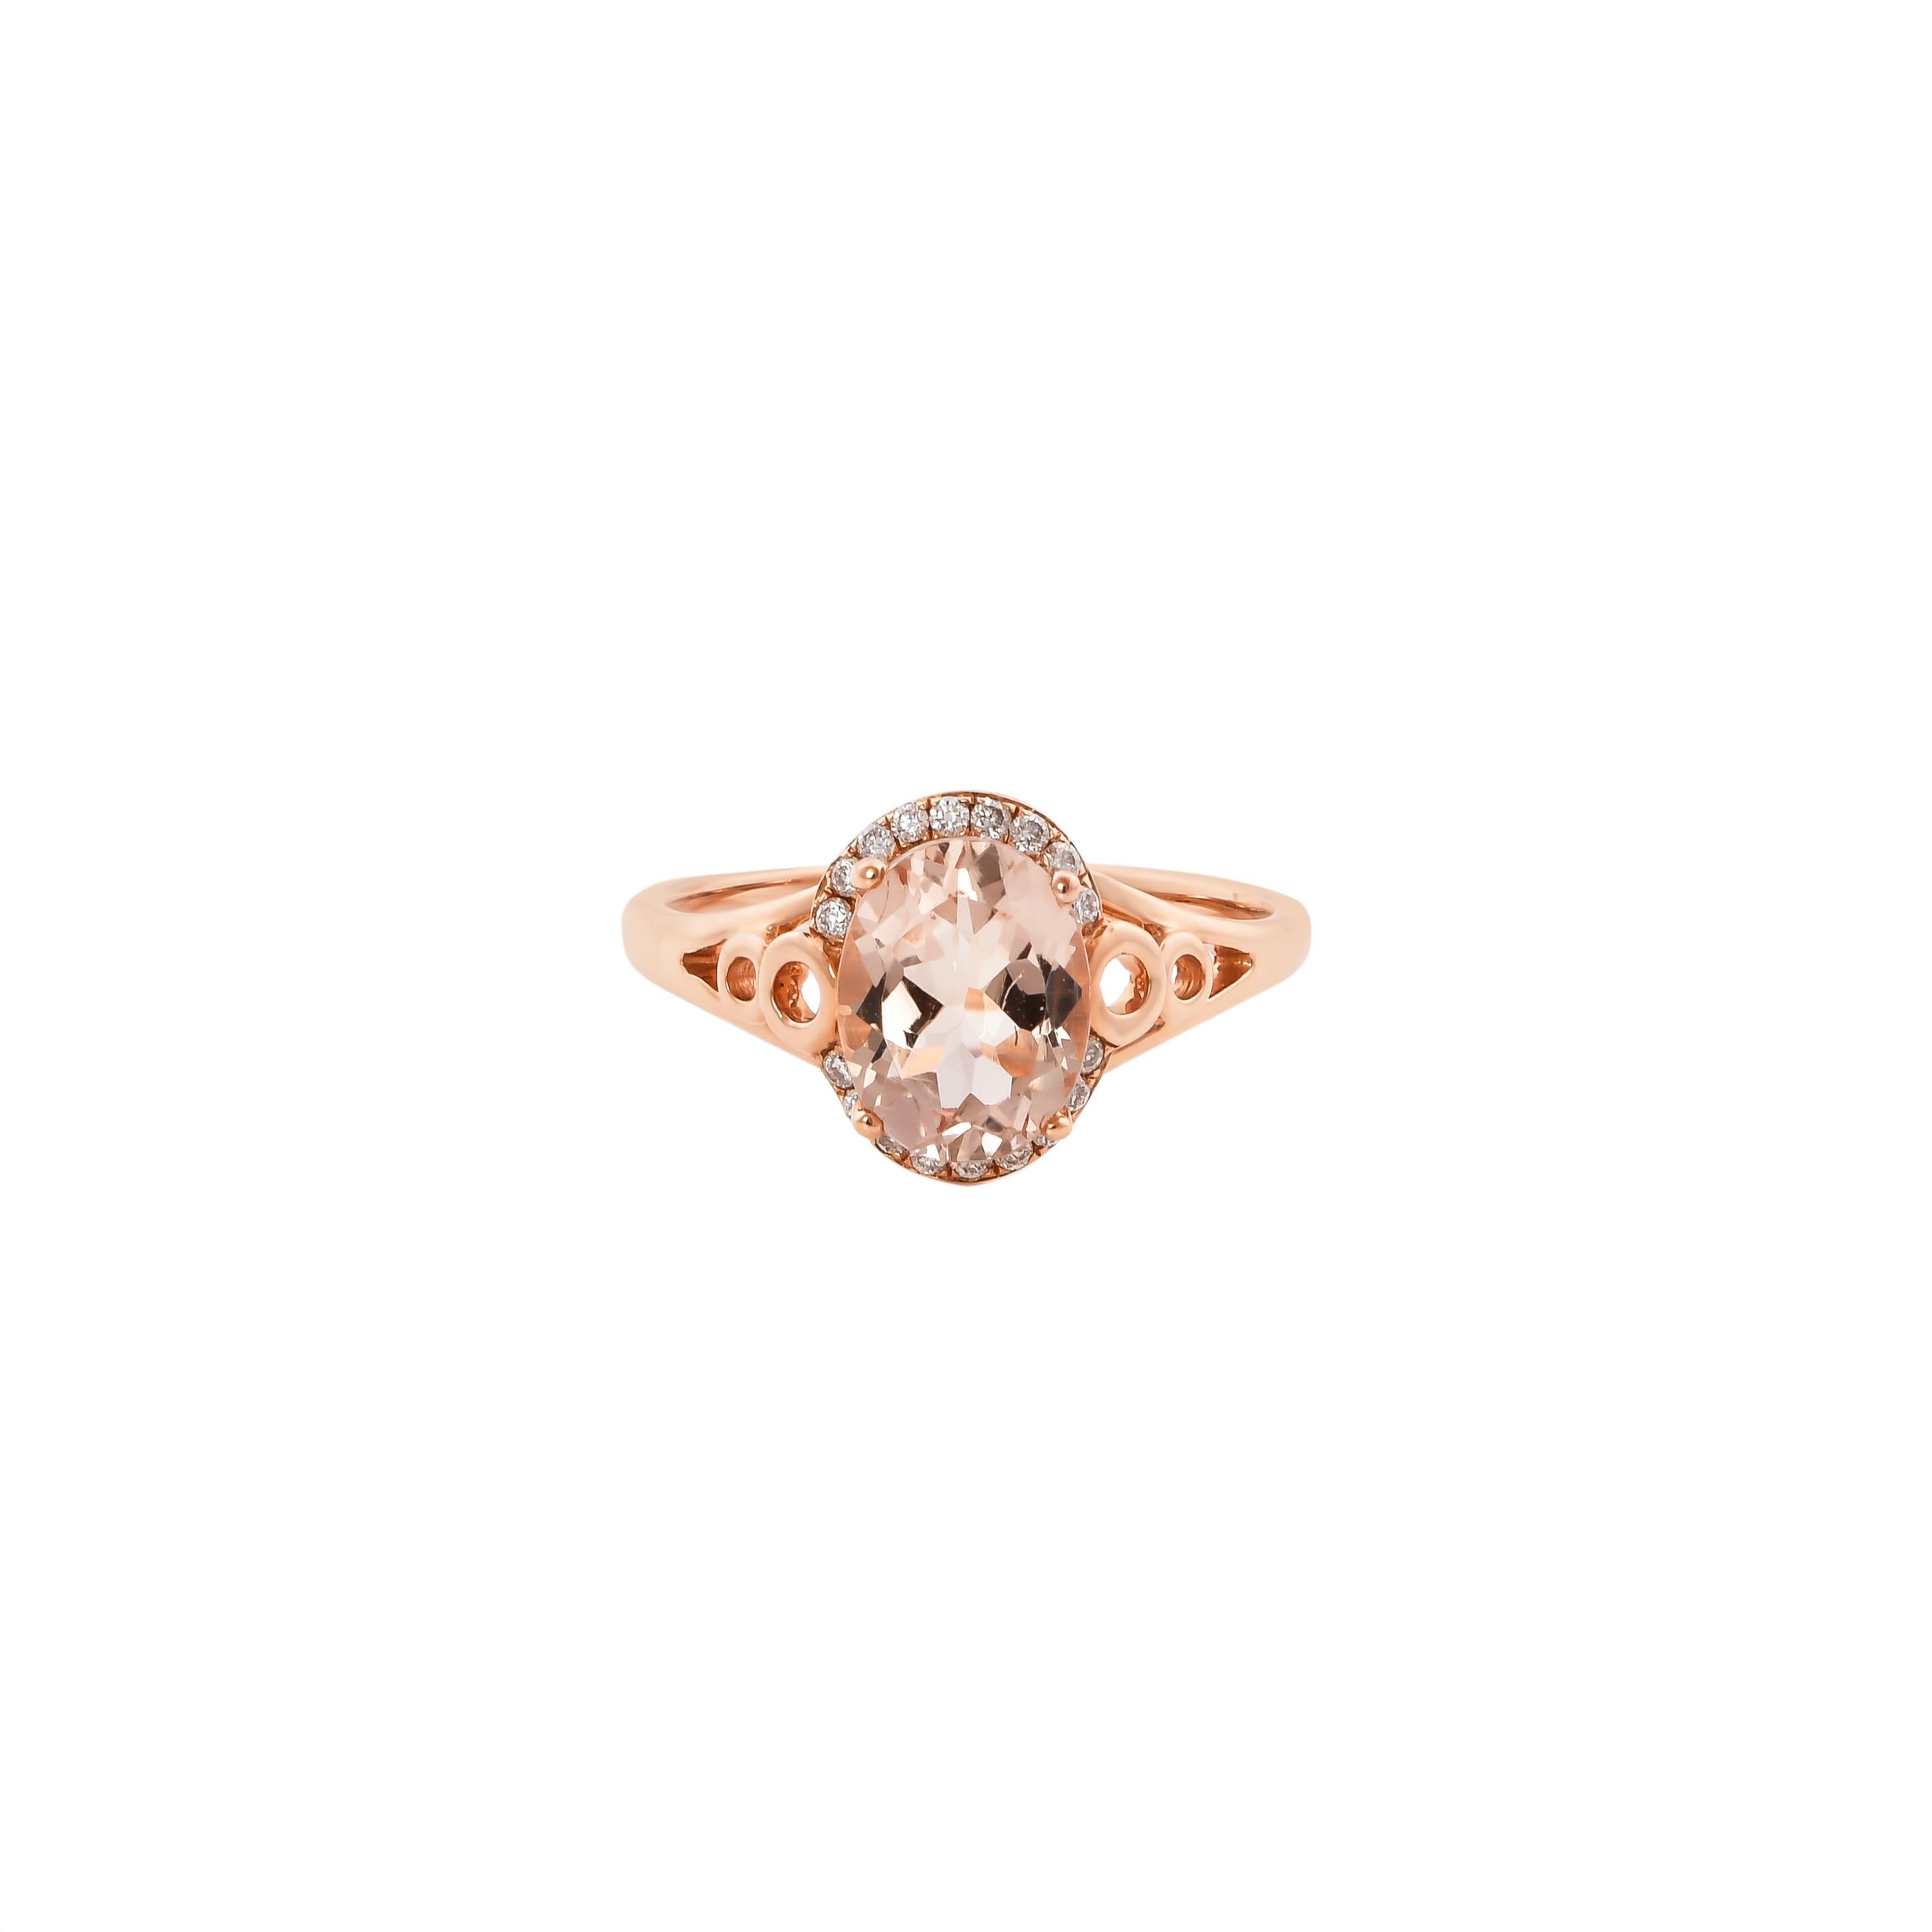 Contemporary 1.7 Carat Morganite and Diamond Ring in 18 Karat Rose Gold For Sale